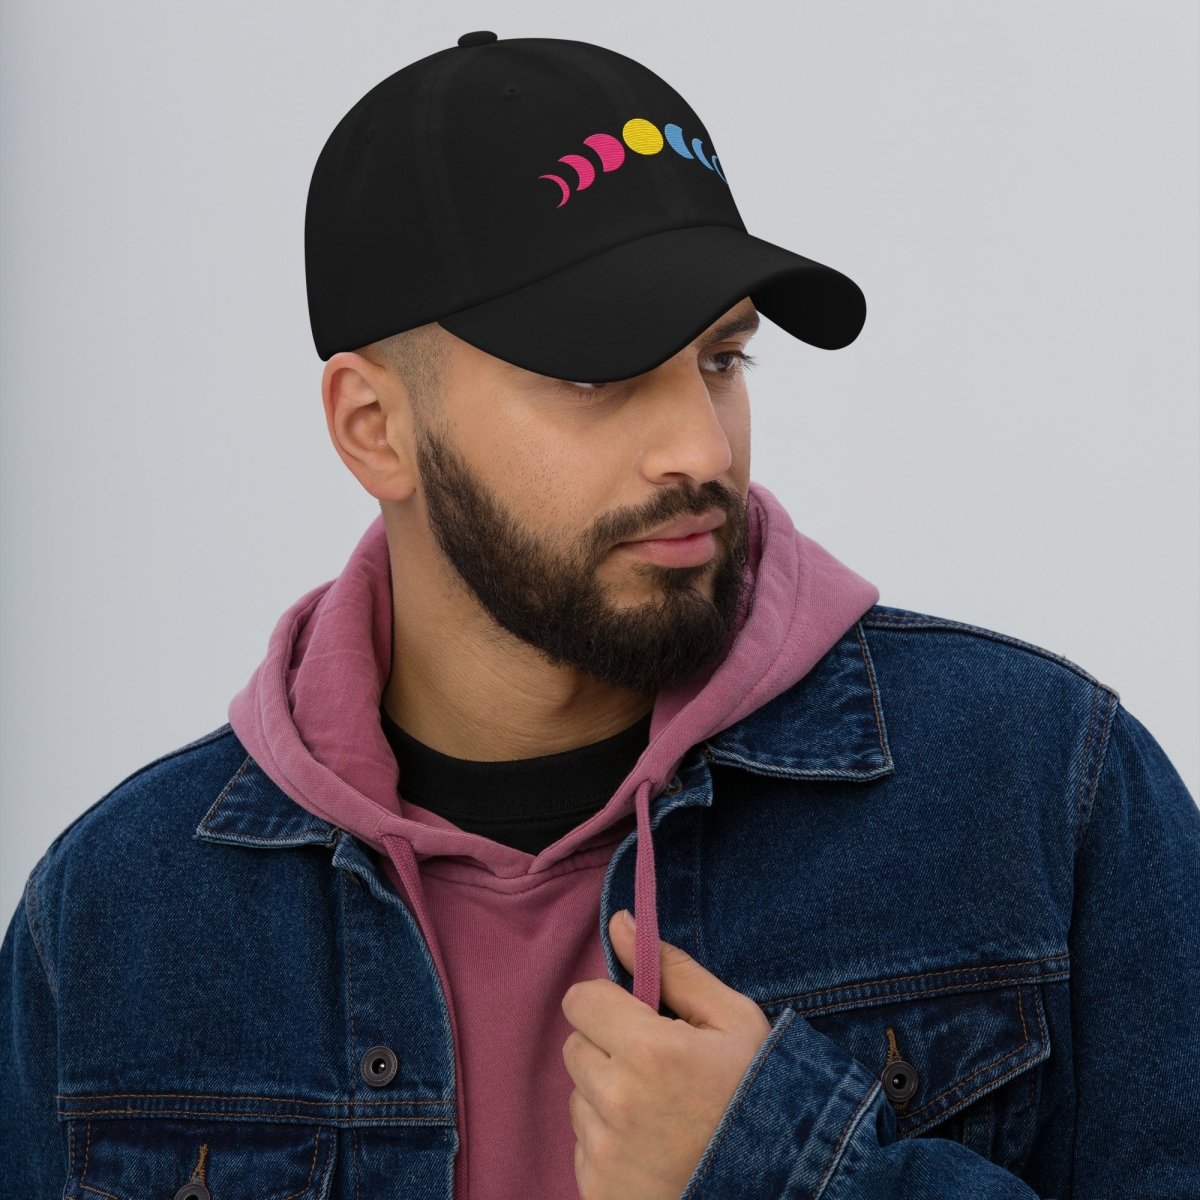 Embroidered Pansexual Moon Phases Dad Hat - On Trend Shirts